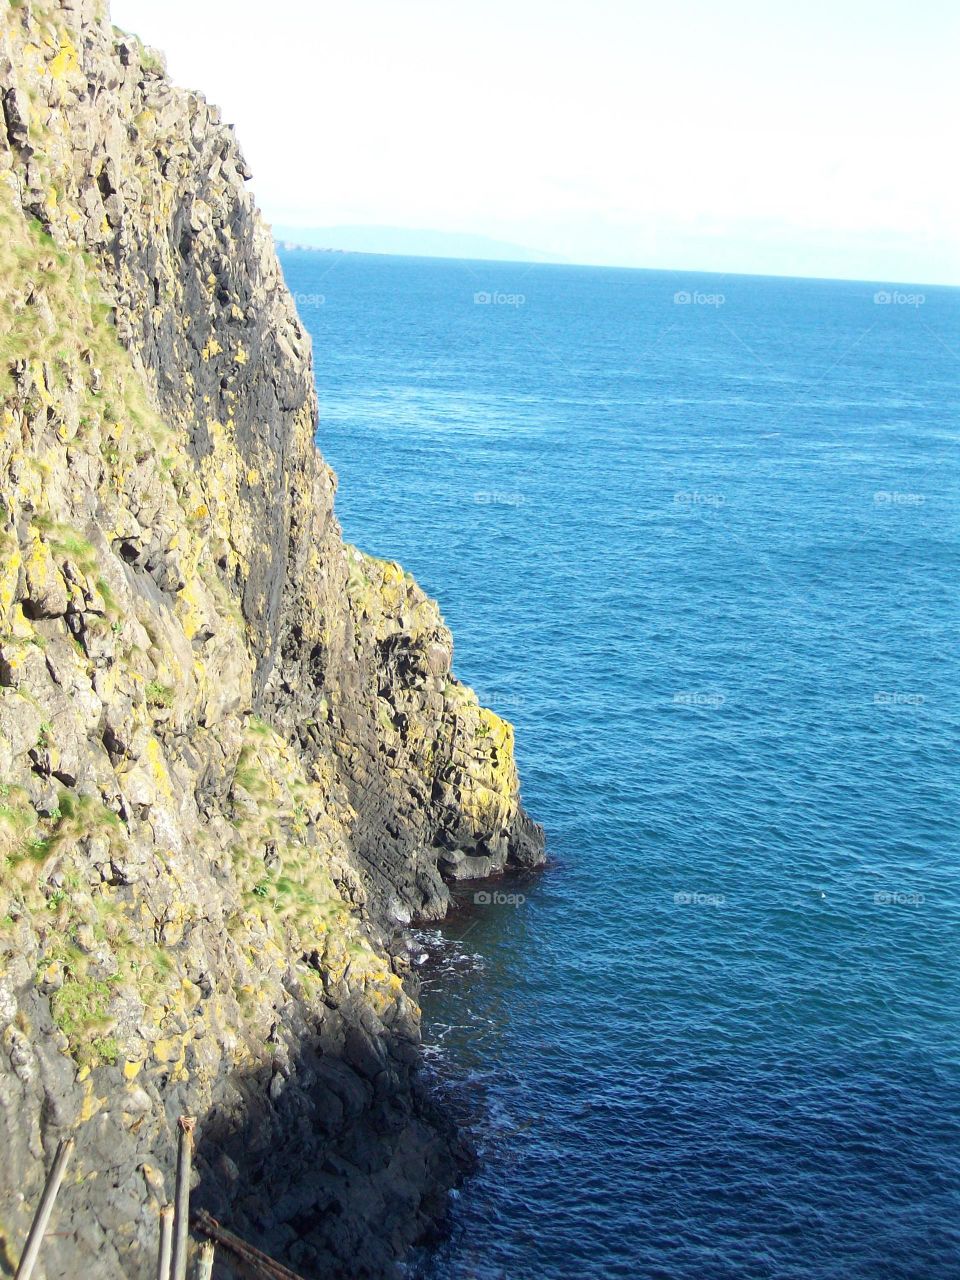 looking down the cliff into the sea at Carrick-a-rede